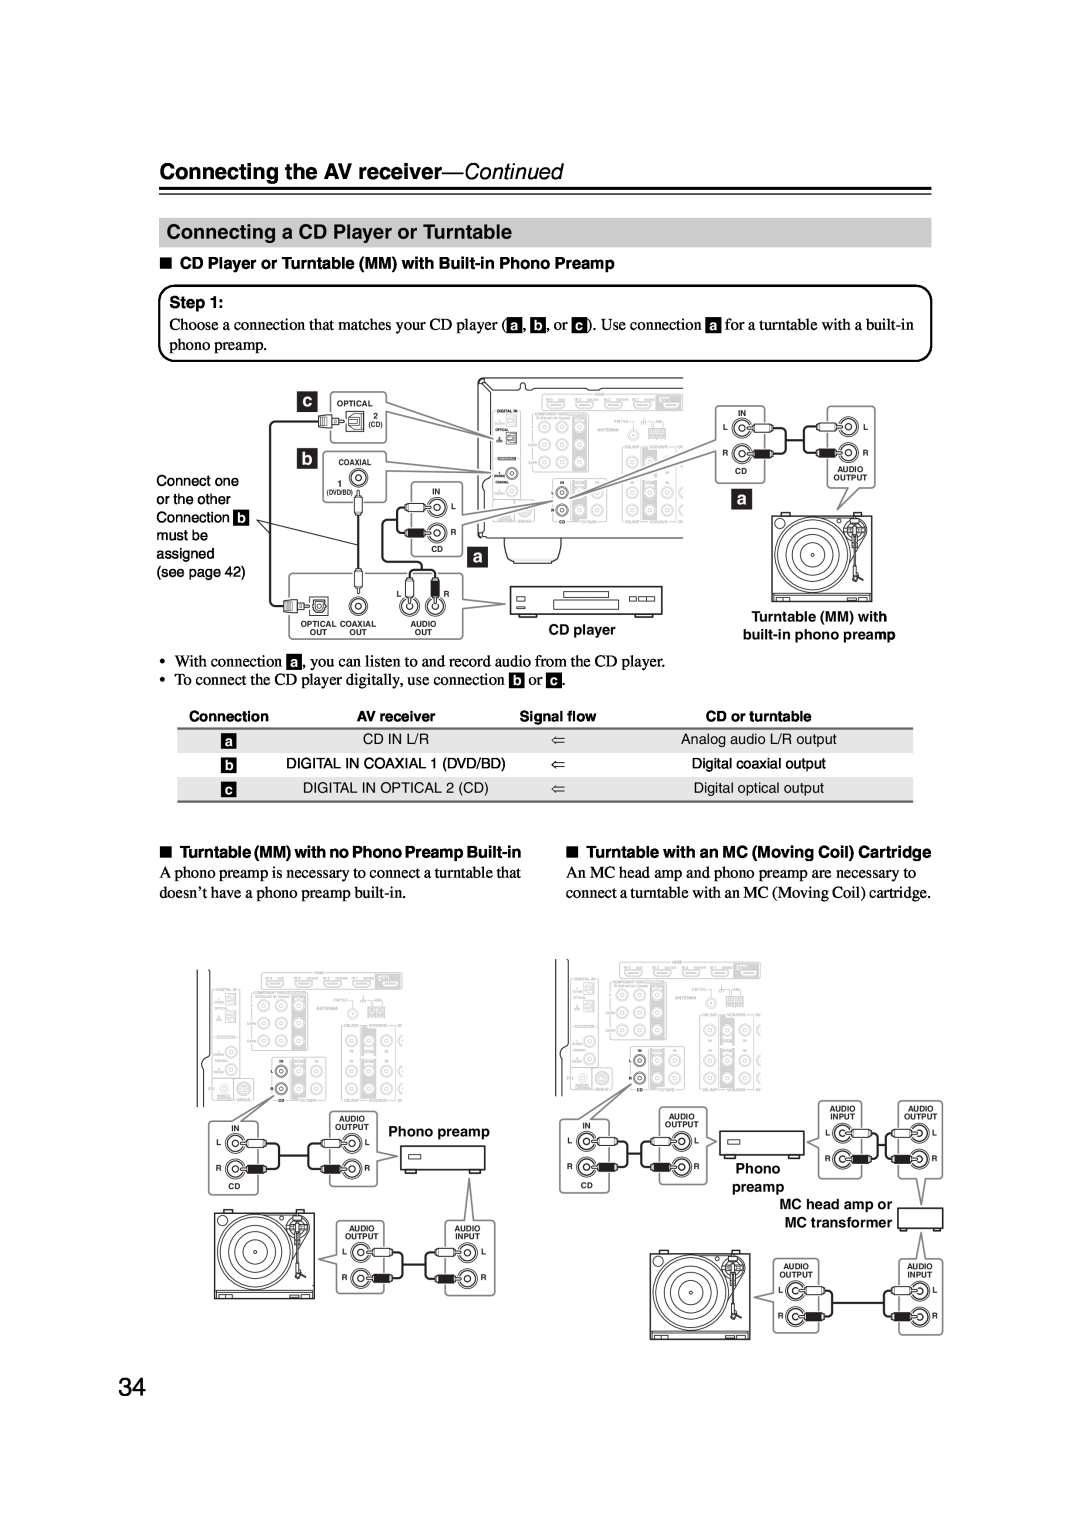 Onkyo 29344934 instruction manual Connecting a CD Player or Turntable, Connecting the AV receiver—Continued, Step 